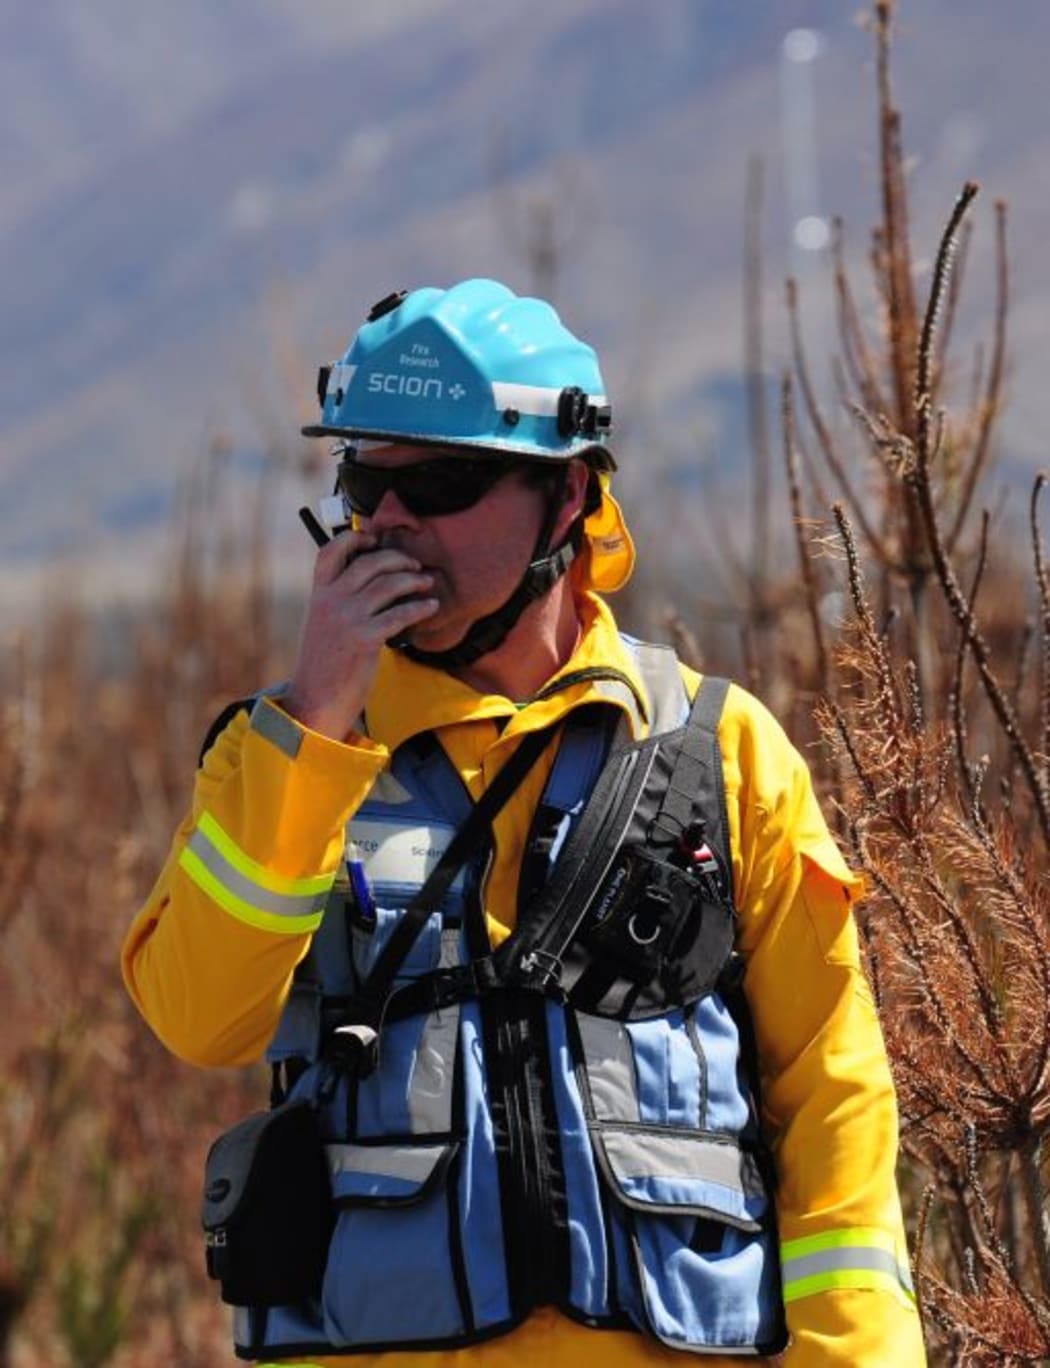 Grant Pearce, a fire scientist at Scion, leads the experimental burn-off project.